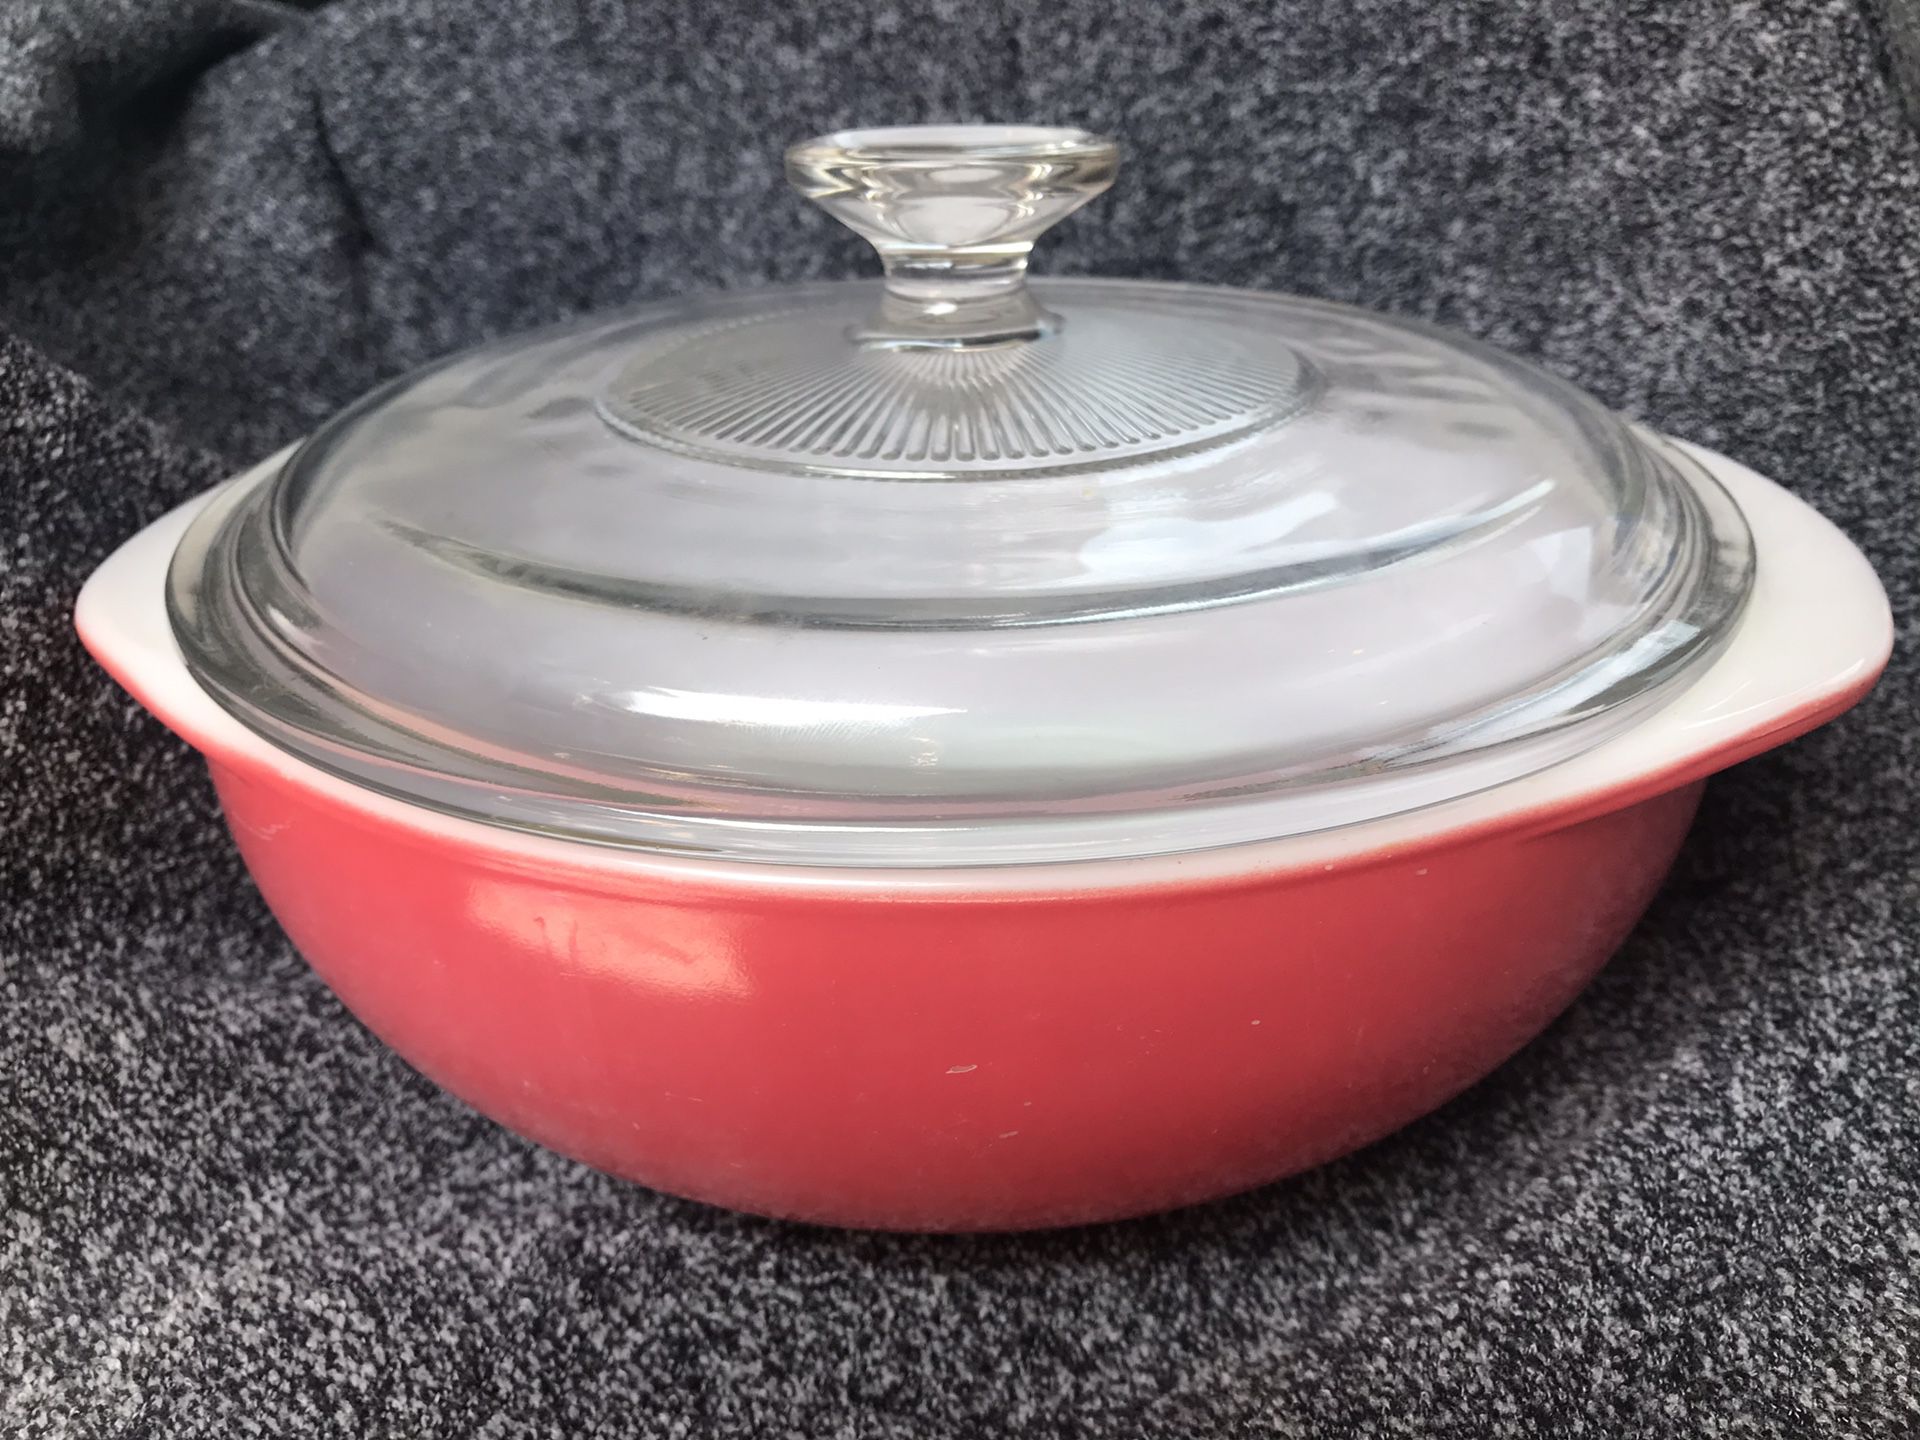 Vintage Pink Pyrex Casserole Bowl with Glass Lid